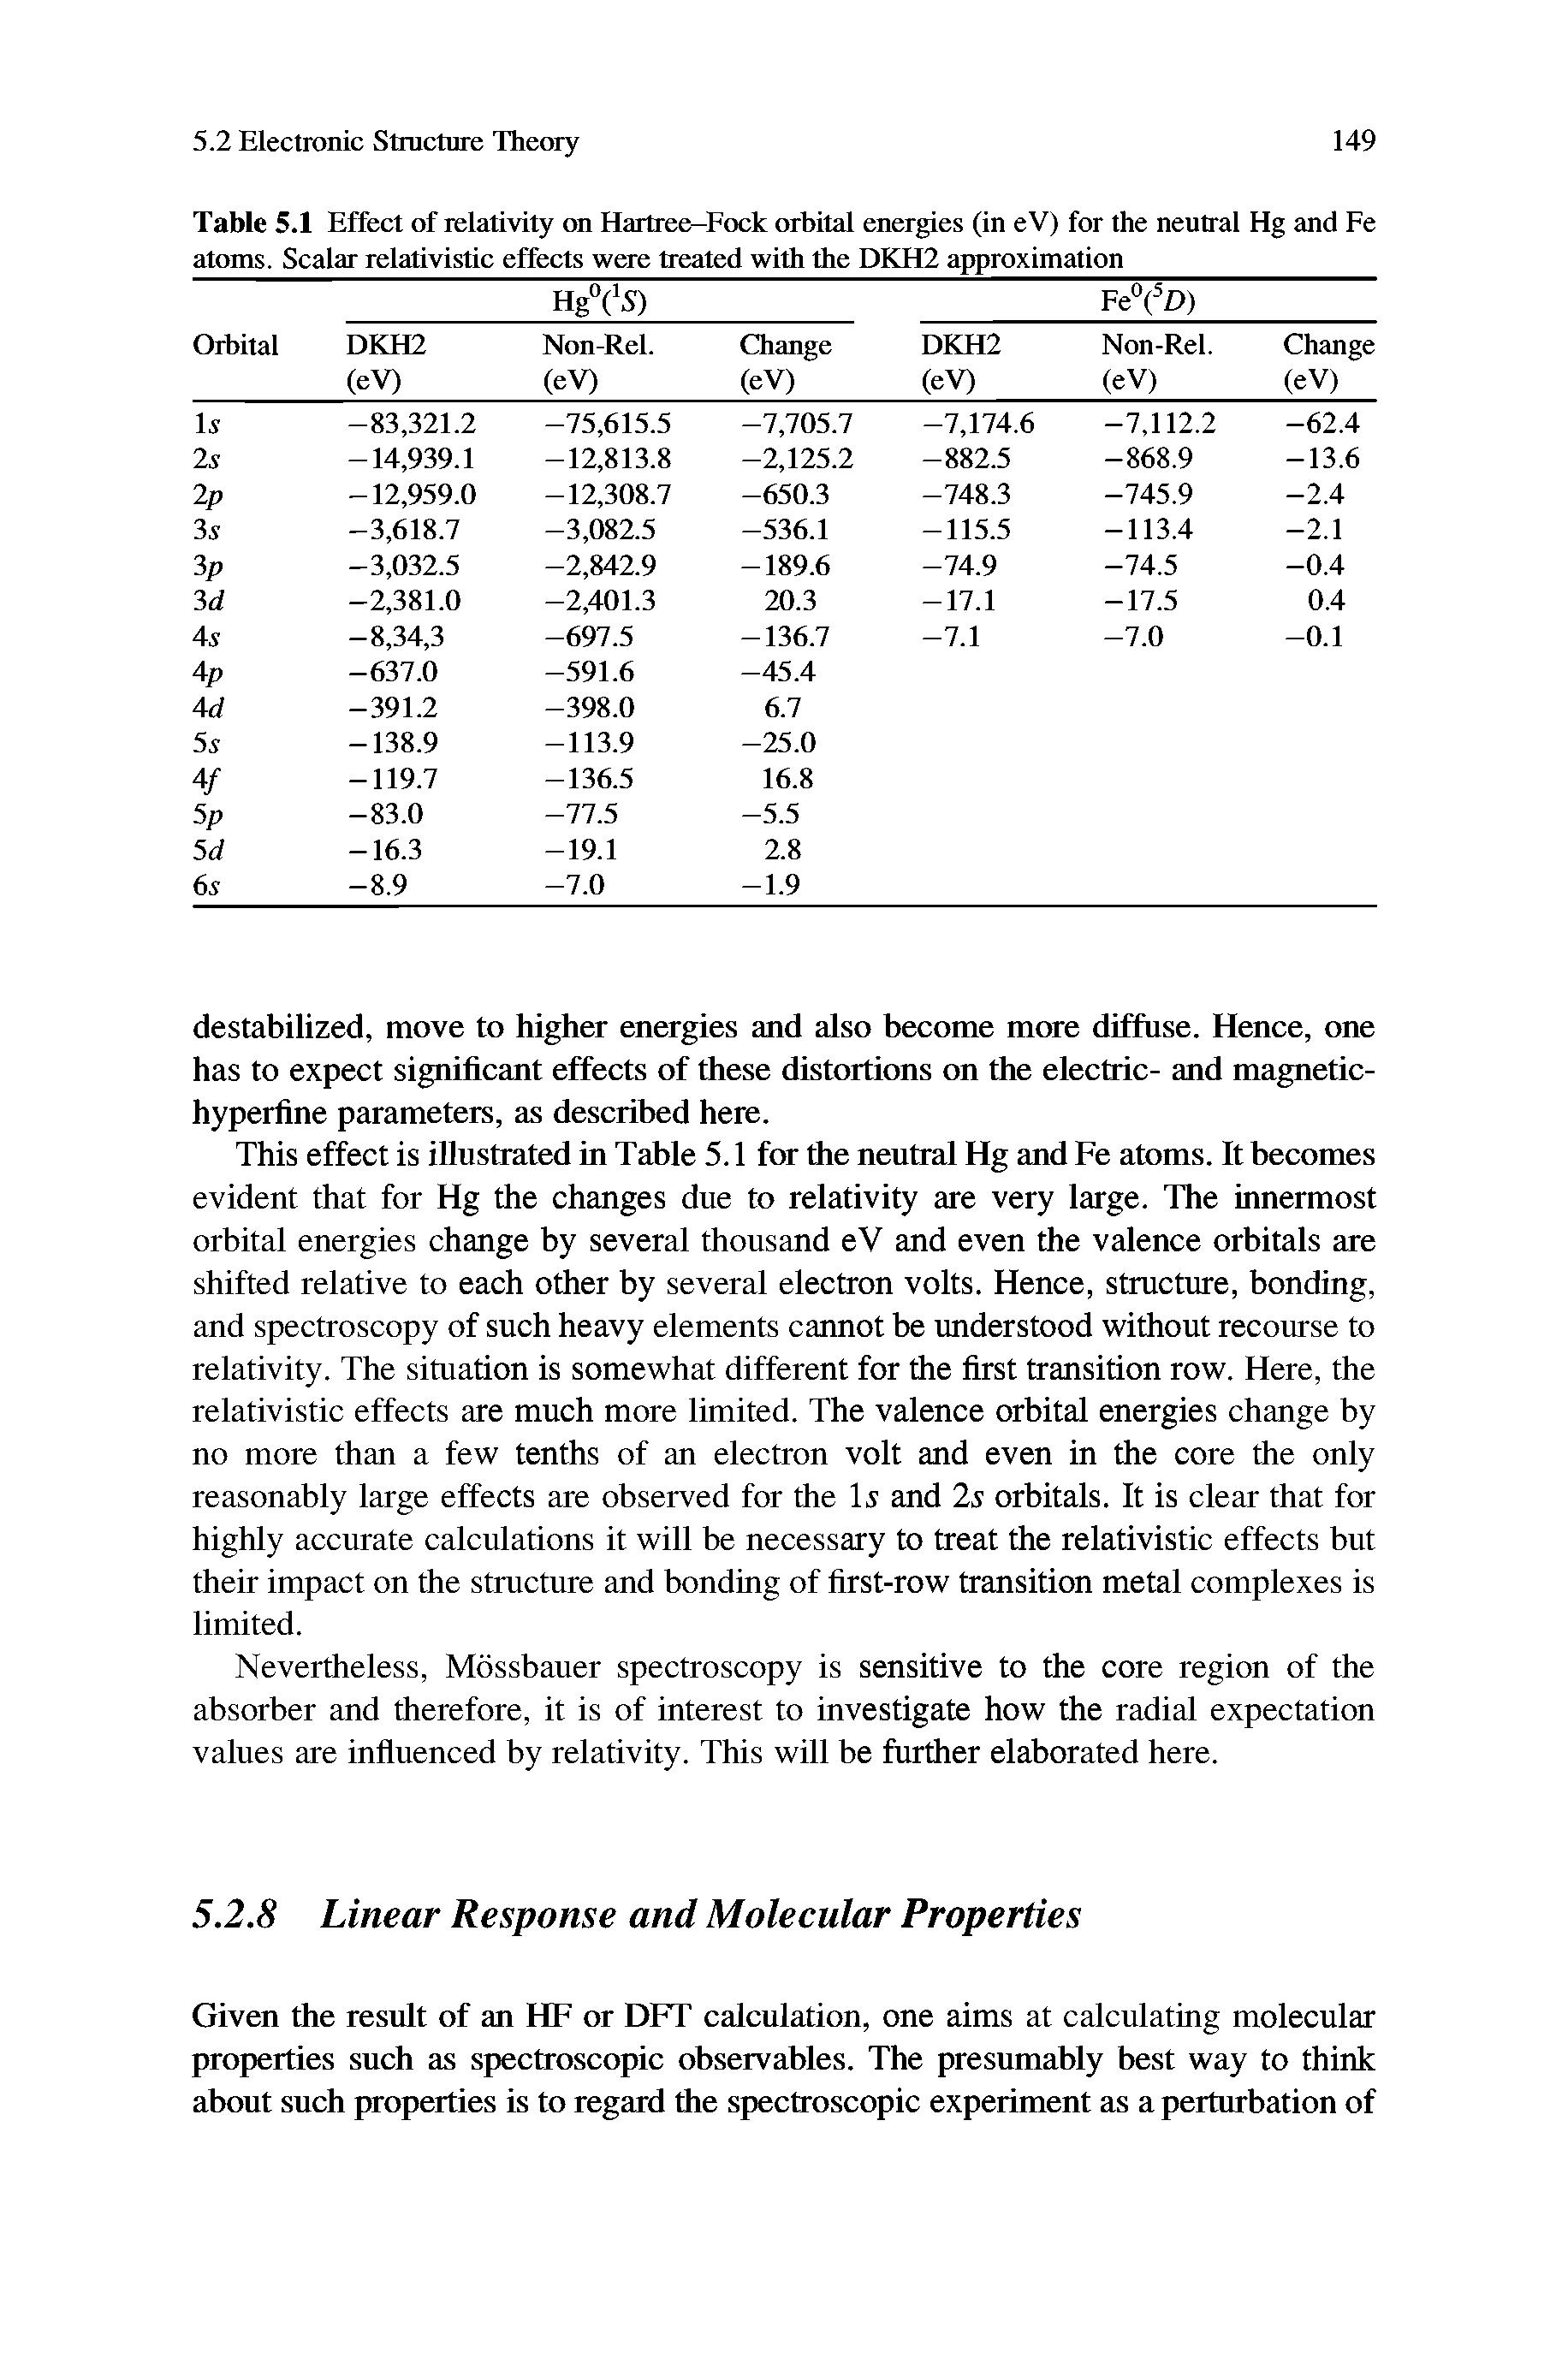 Table 5.1 Effect of relativity on Hartree-Eock orbital energies (in eV) for the neutral Hg and Fe atoms. Scalar relativistic effects were treated with the DKH2 approximation...